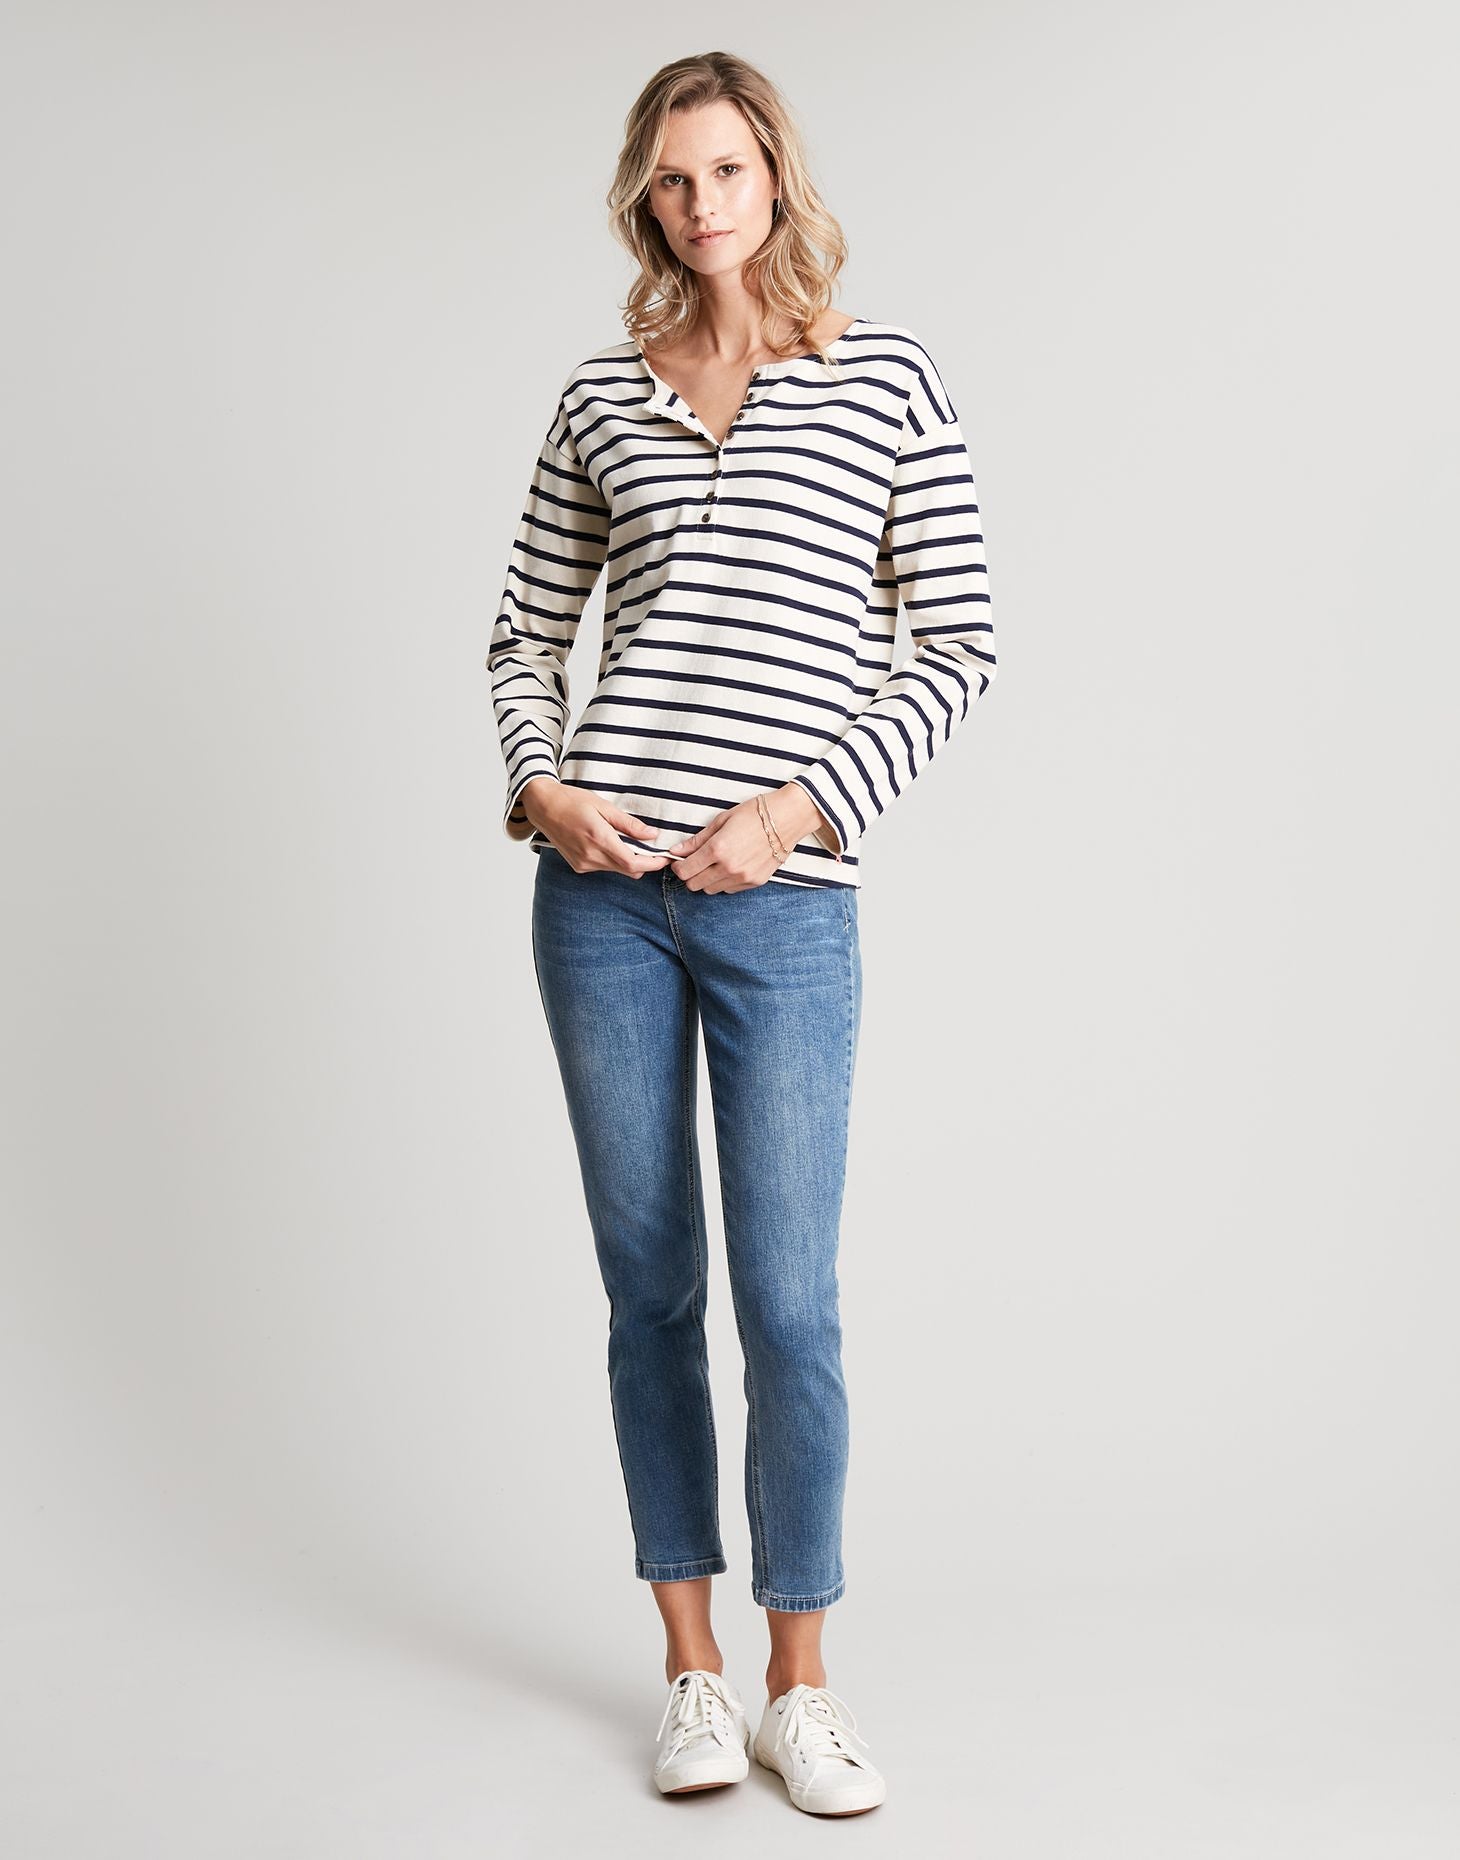 Joules - Olive Long Sleeve Henley Top - CREAM NAVY STRIPE